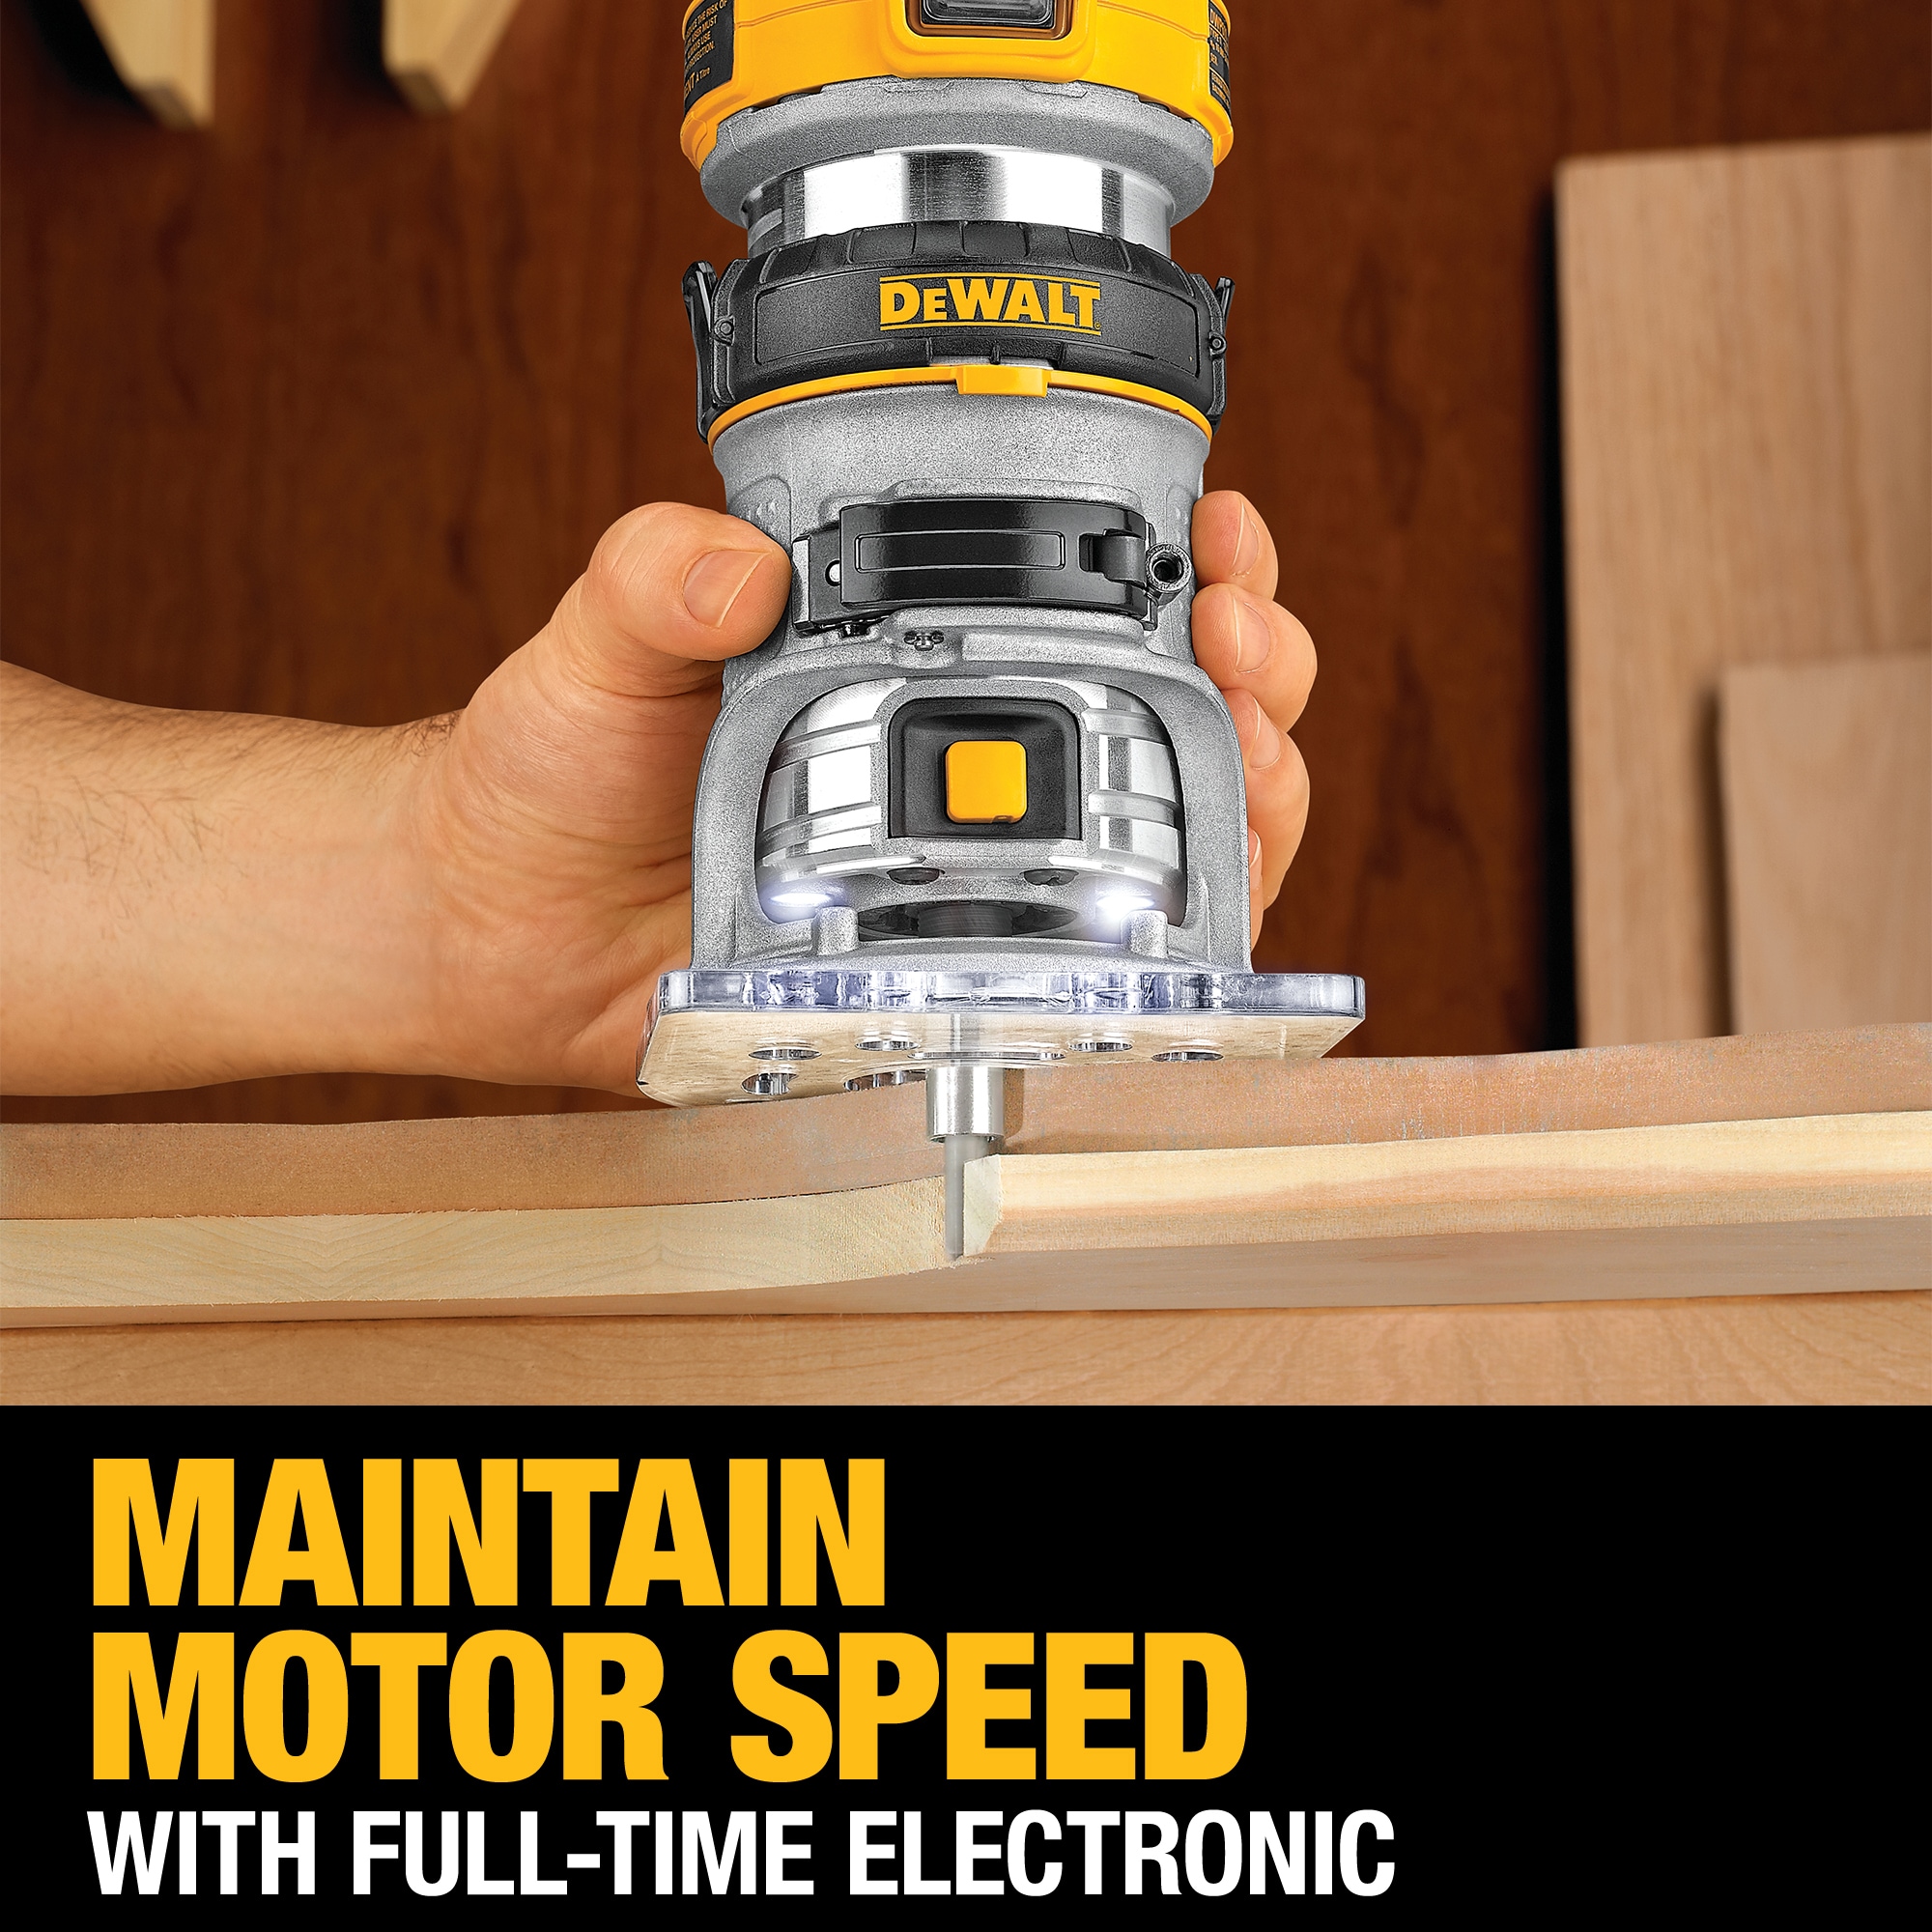 DEWALT 1/4-in 1.25-HP Variable Speed Fixed Corded Router in the at Lowes.com